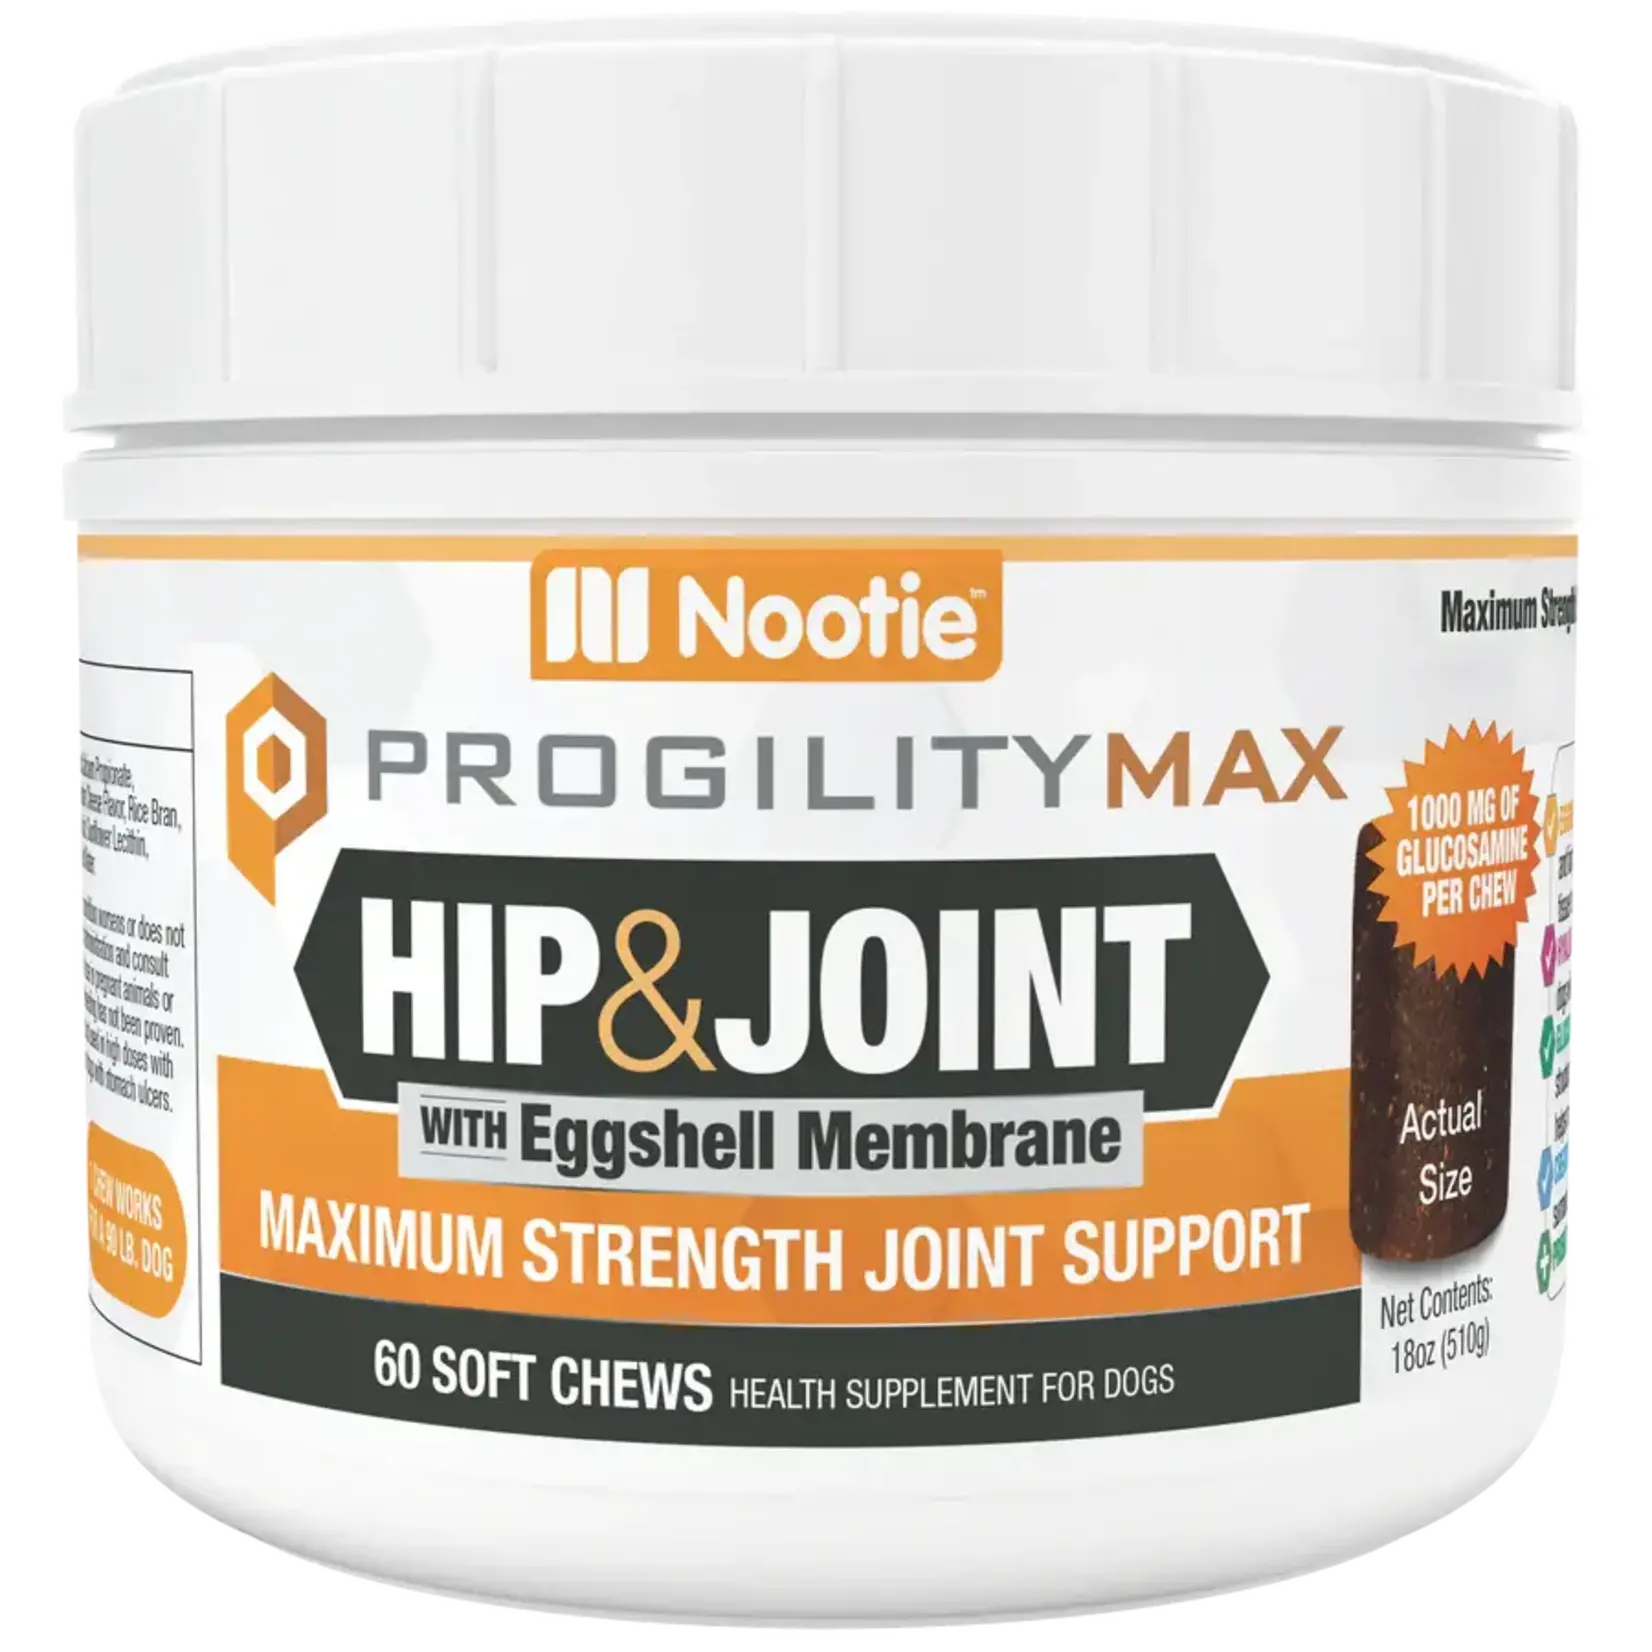 Nootie ProgilityMax Hip & Joint Soft Chew Supplement for Large Dogs 60ct